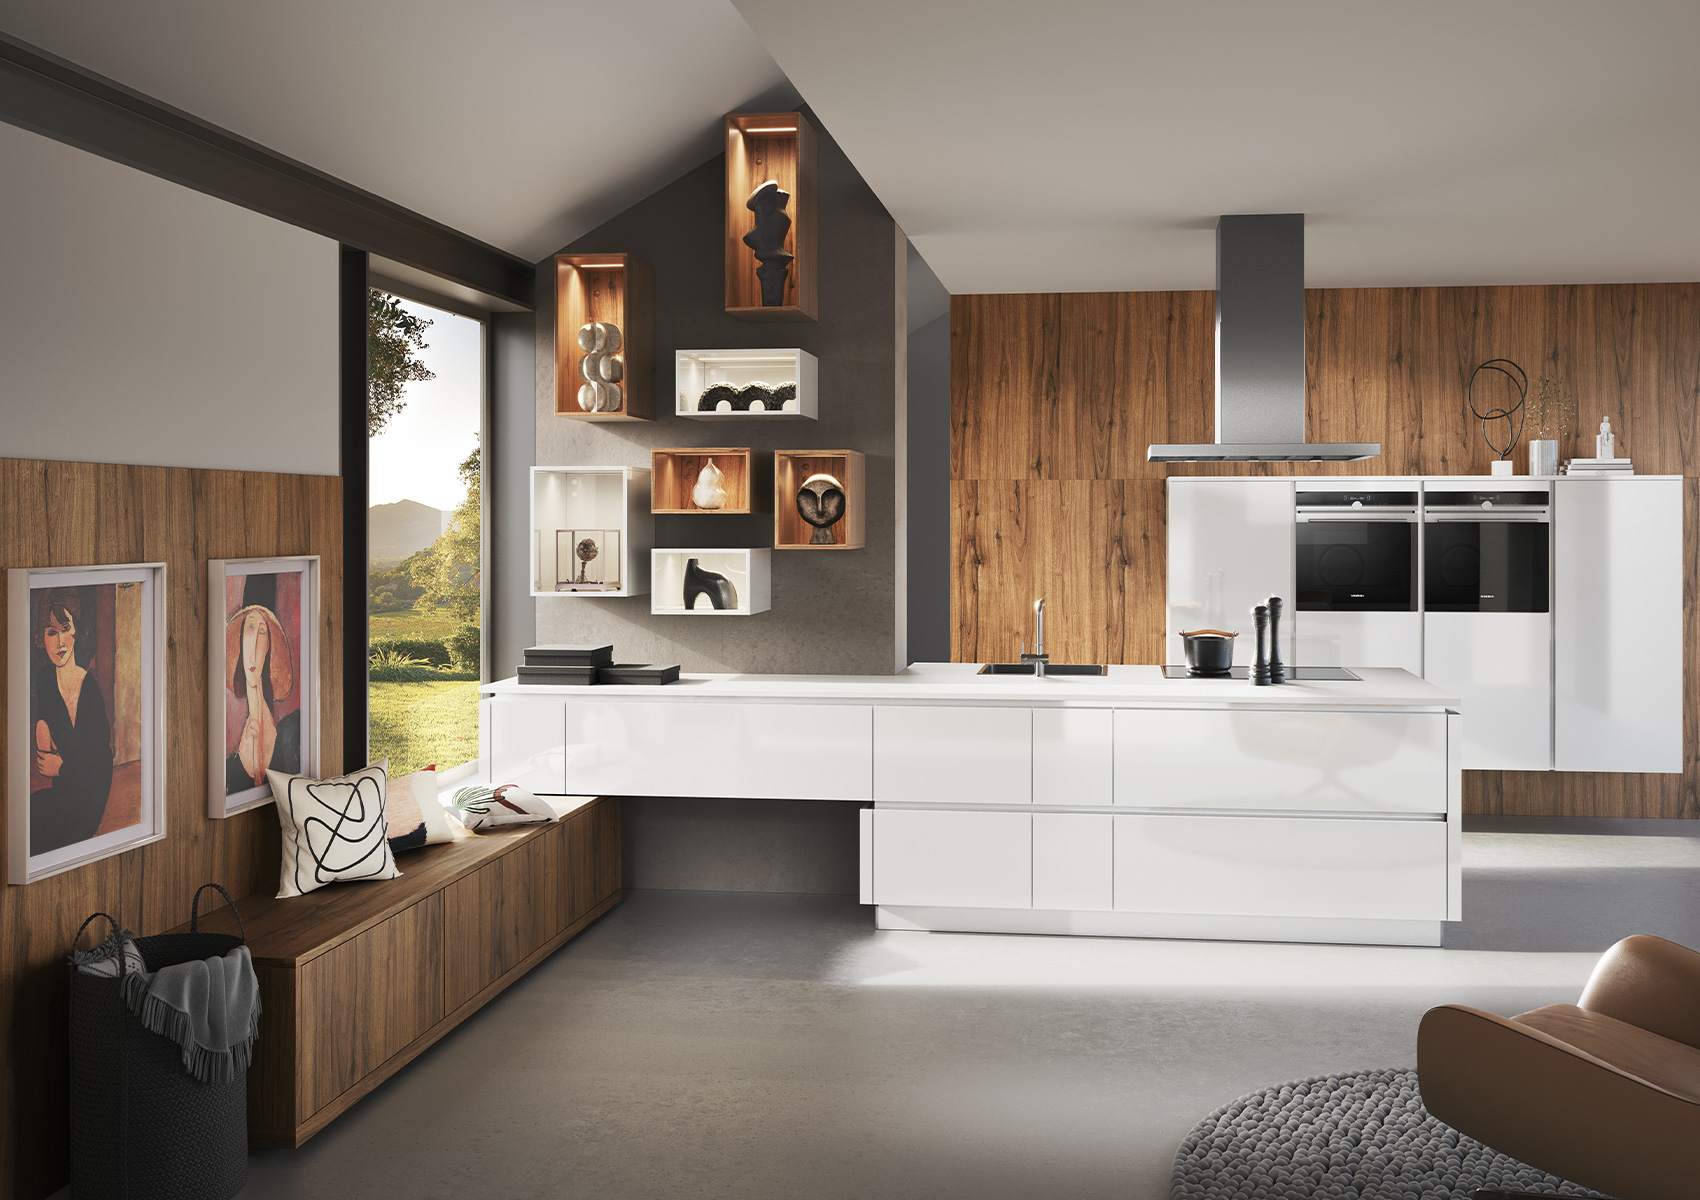 Kitchen with cooking island and bench in glossy white and wood look